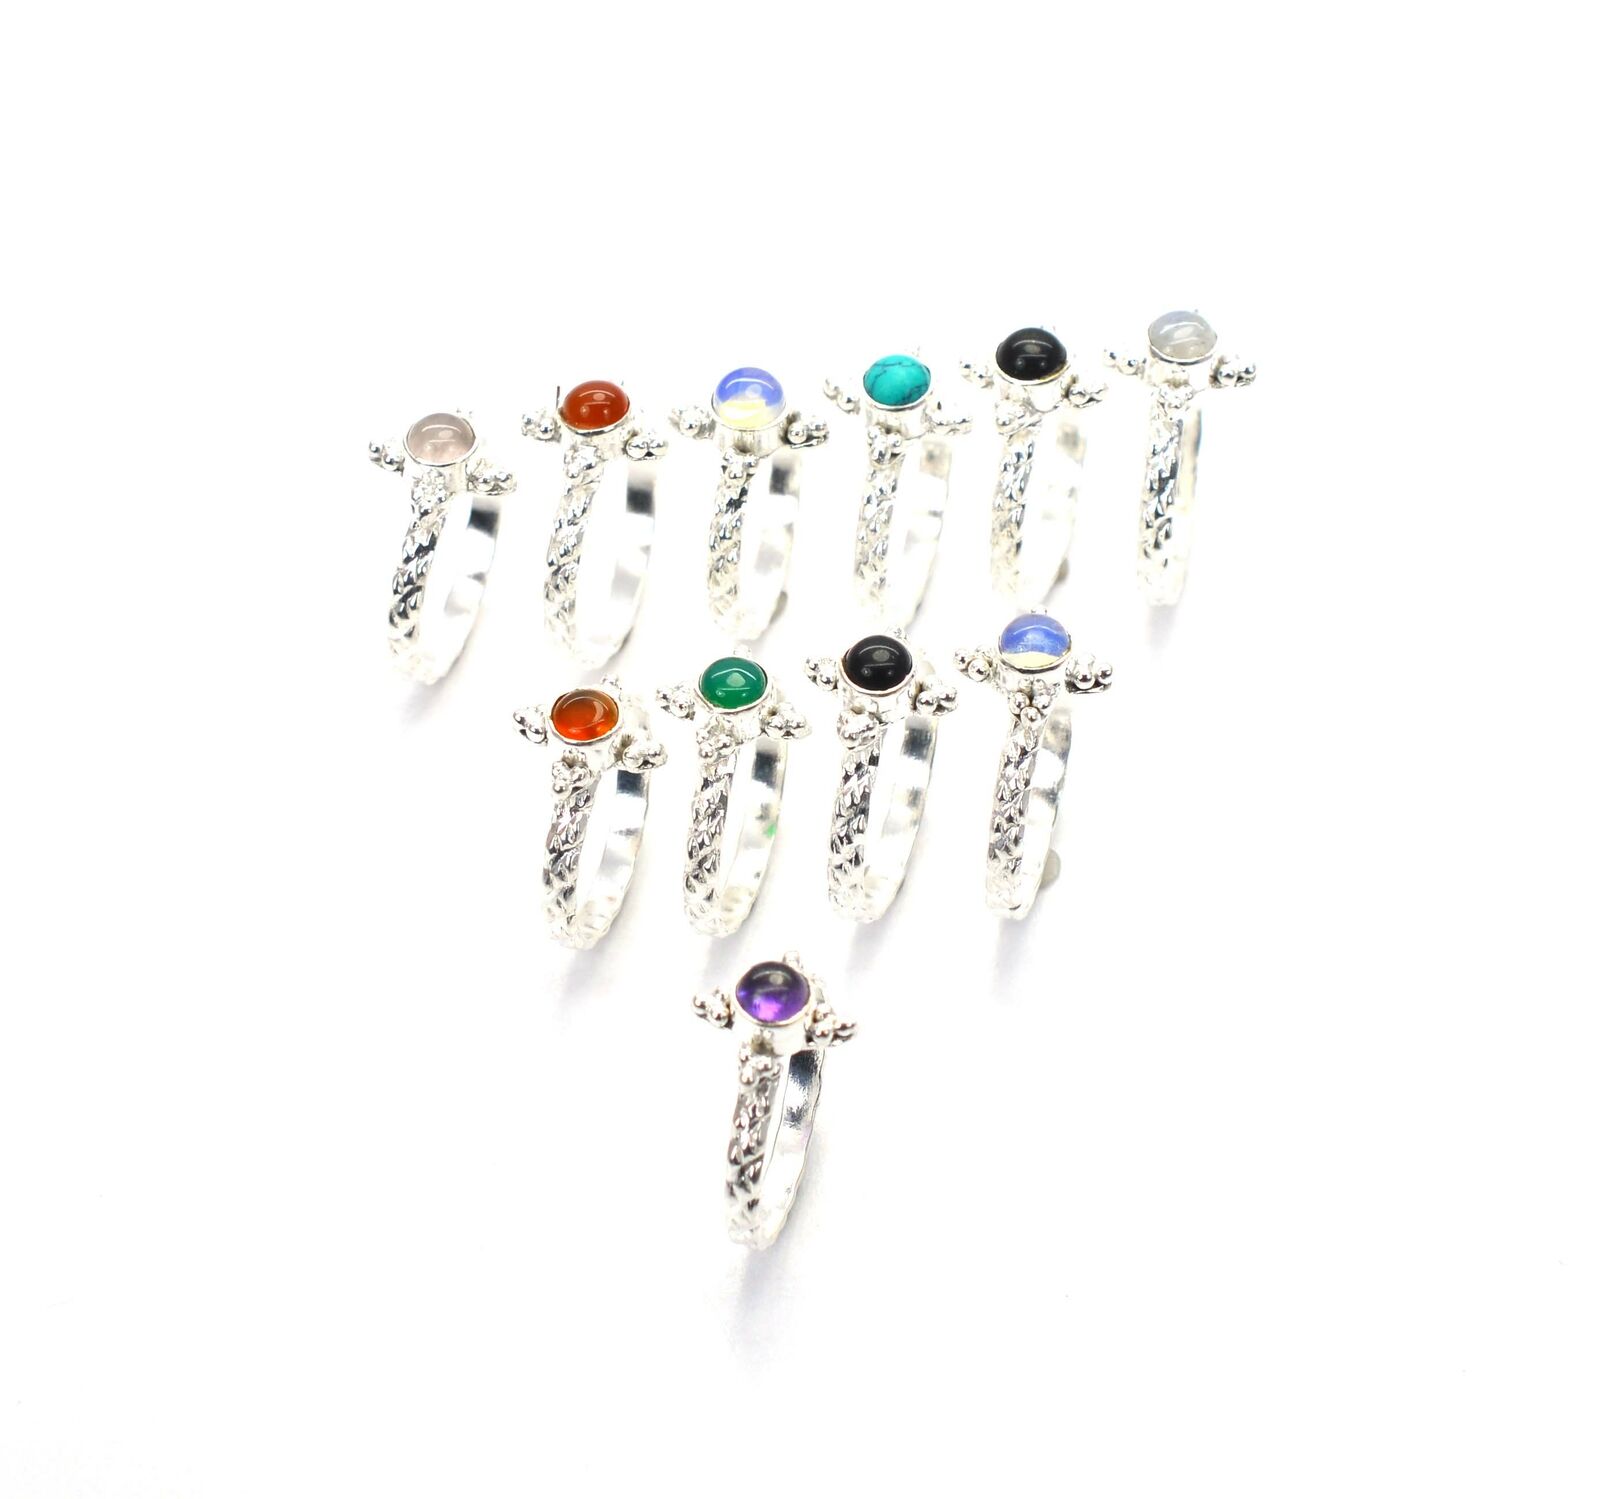 Wholesale 11pc 925 Silver Plated Green Onyx Mix Stone Ring Lot Gt607